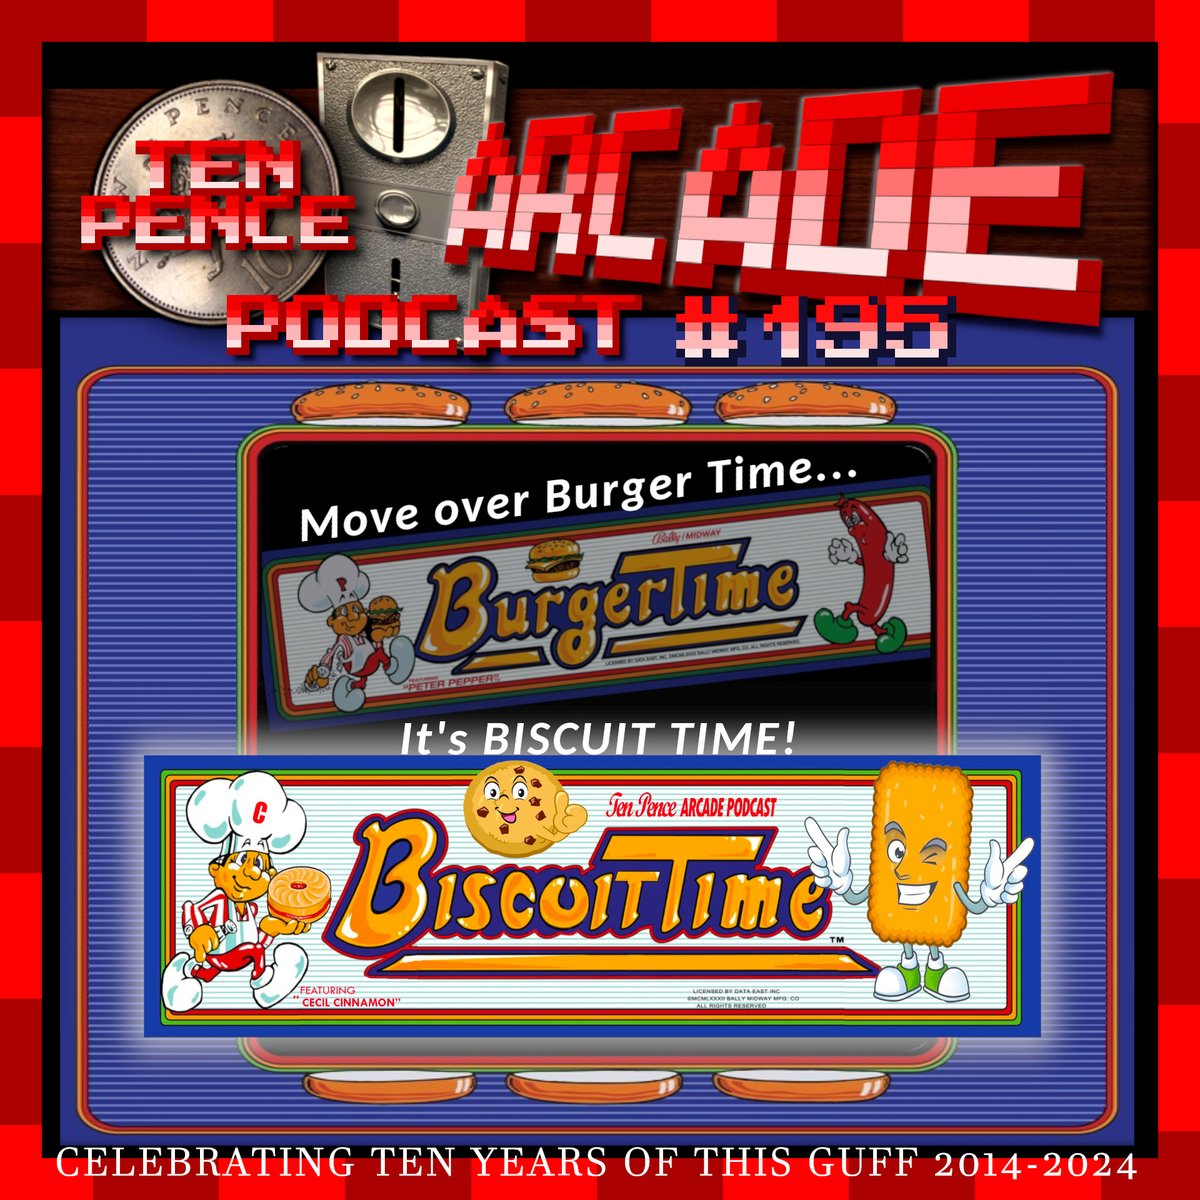 TEN PENCE IS TEN YEARS OLD! We've got all nostalgic and been reminiscing, which means the return of the classic 'Arcade Hand' sketch 'I'm An Astro Blaster' from the 10p Orchestra. Big thanks @RetroRussRaider for providing the Burger Time /Biscuit Time logo bit.ly/3vT2U2l